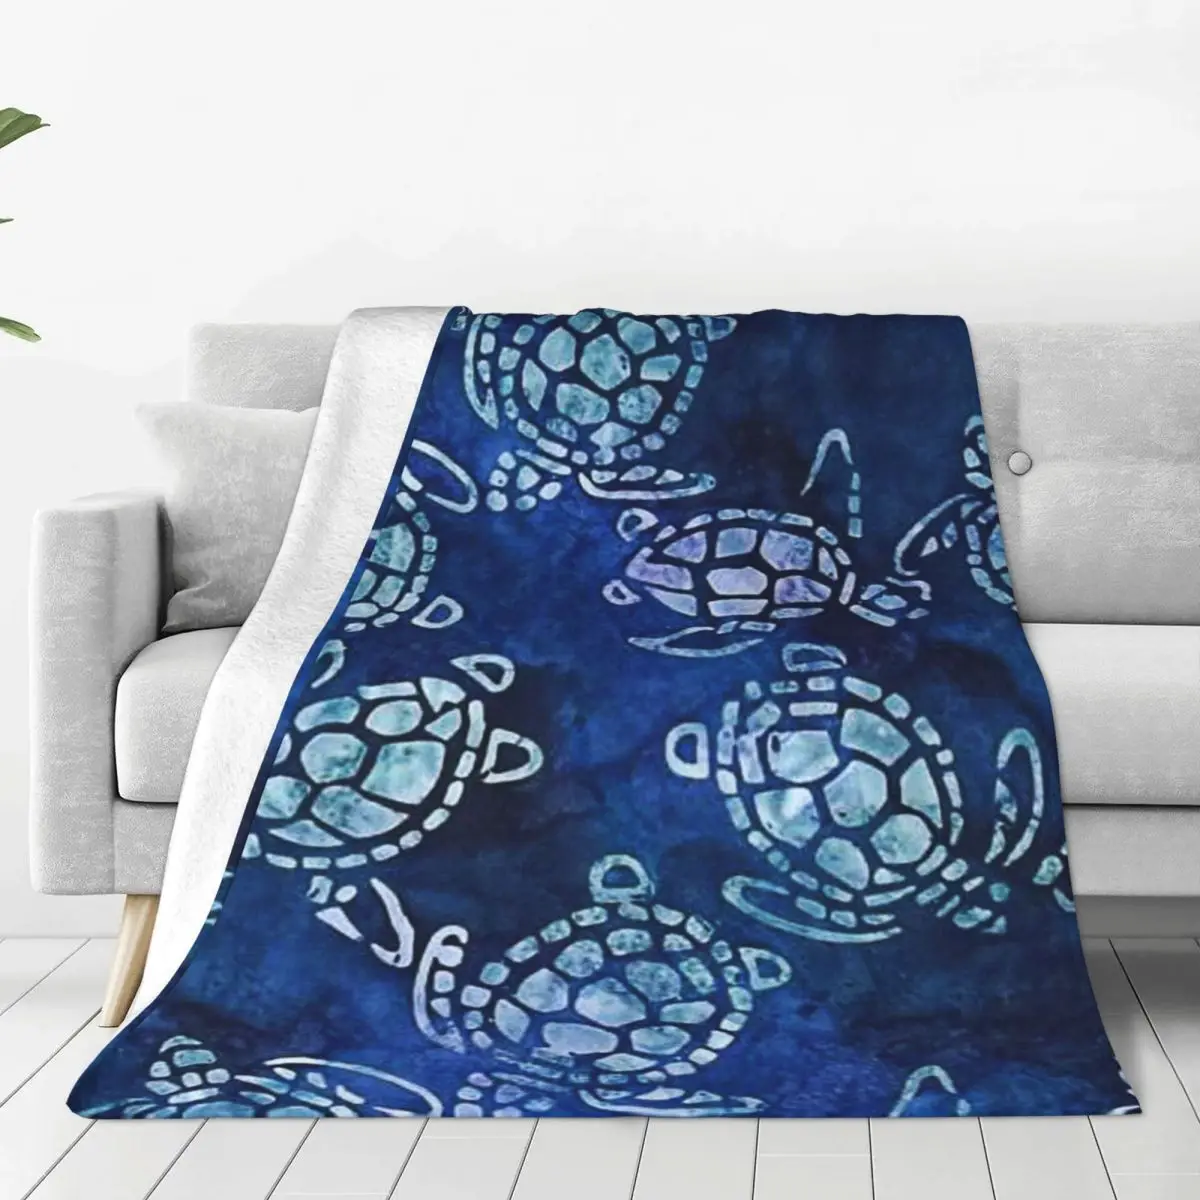 

Sea Turtles Soft Fleece Throw Blanket Warm and Cozy for All Seasons Comfy Microfiber Blanket for Couch Sofa Bed 40"x30"